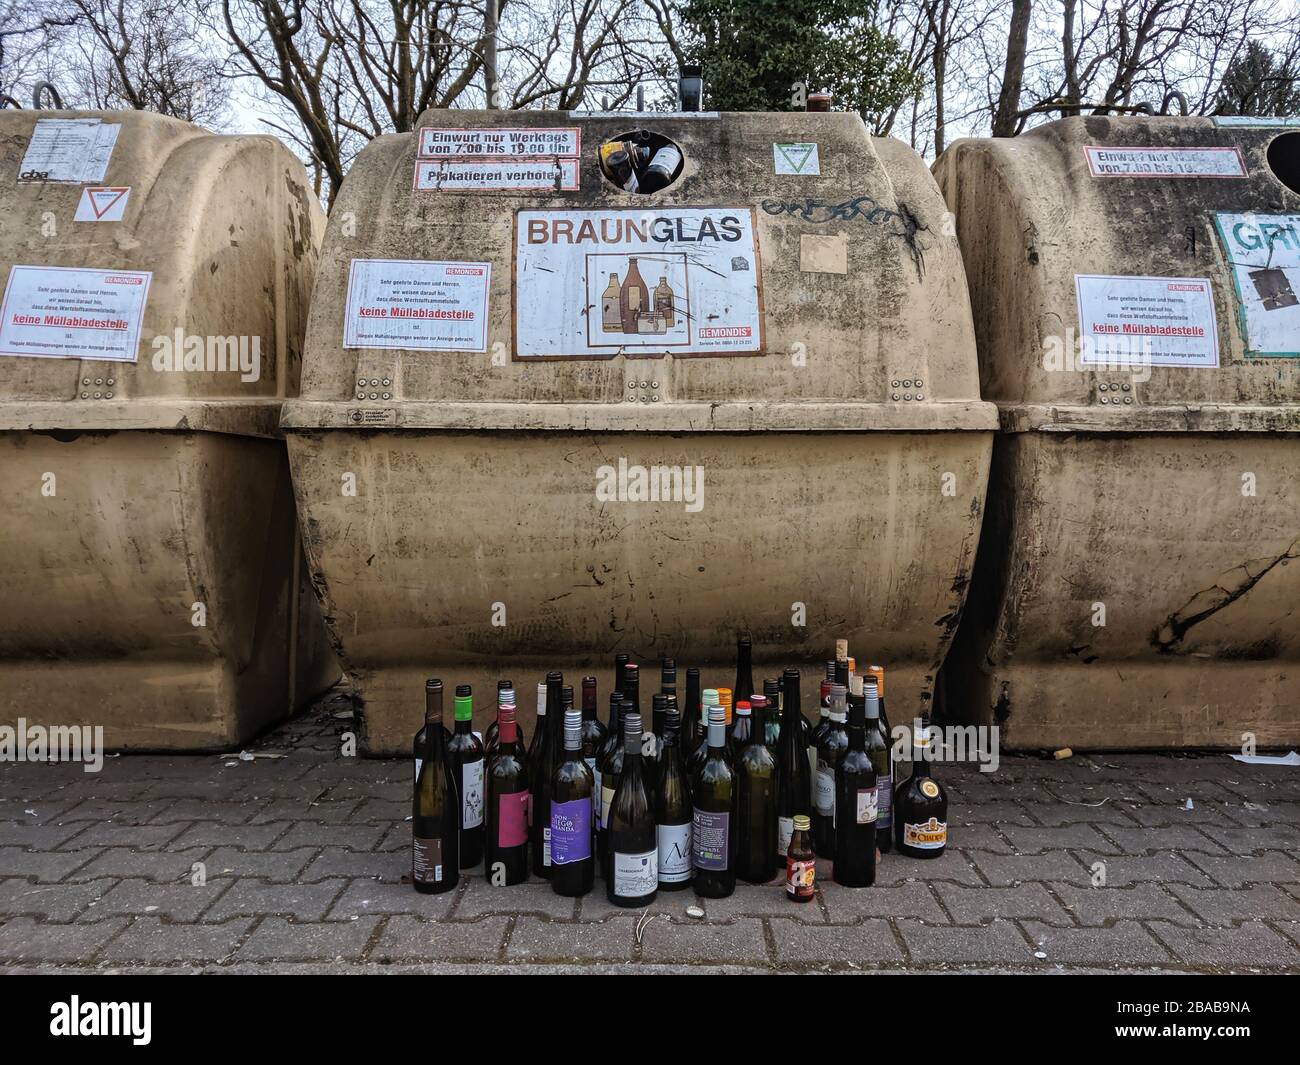 Munich, Bavaria, Germany. 26th Mar, 2020. A more common sight seen since Bavaria instituted its AusgangseinschrÃÂ¤nkung (restrictions on going outside): alcohol bottles lined up in front of full recycling bins. Credit: Sachelle Babbar/ZUMA Wire/Alamy Live News Stock Photo